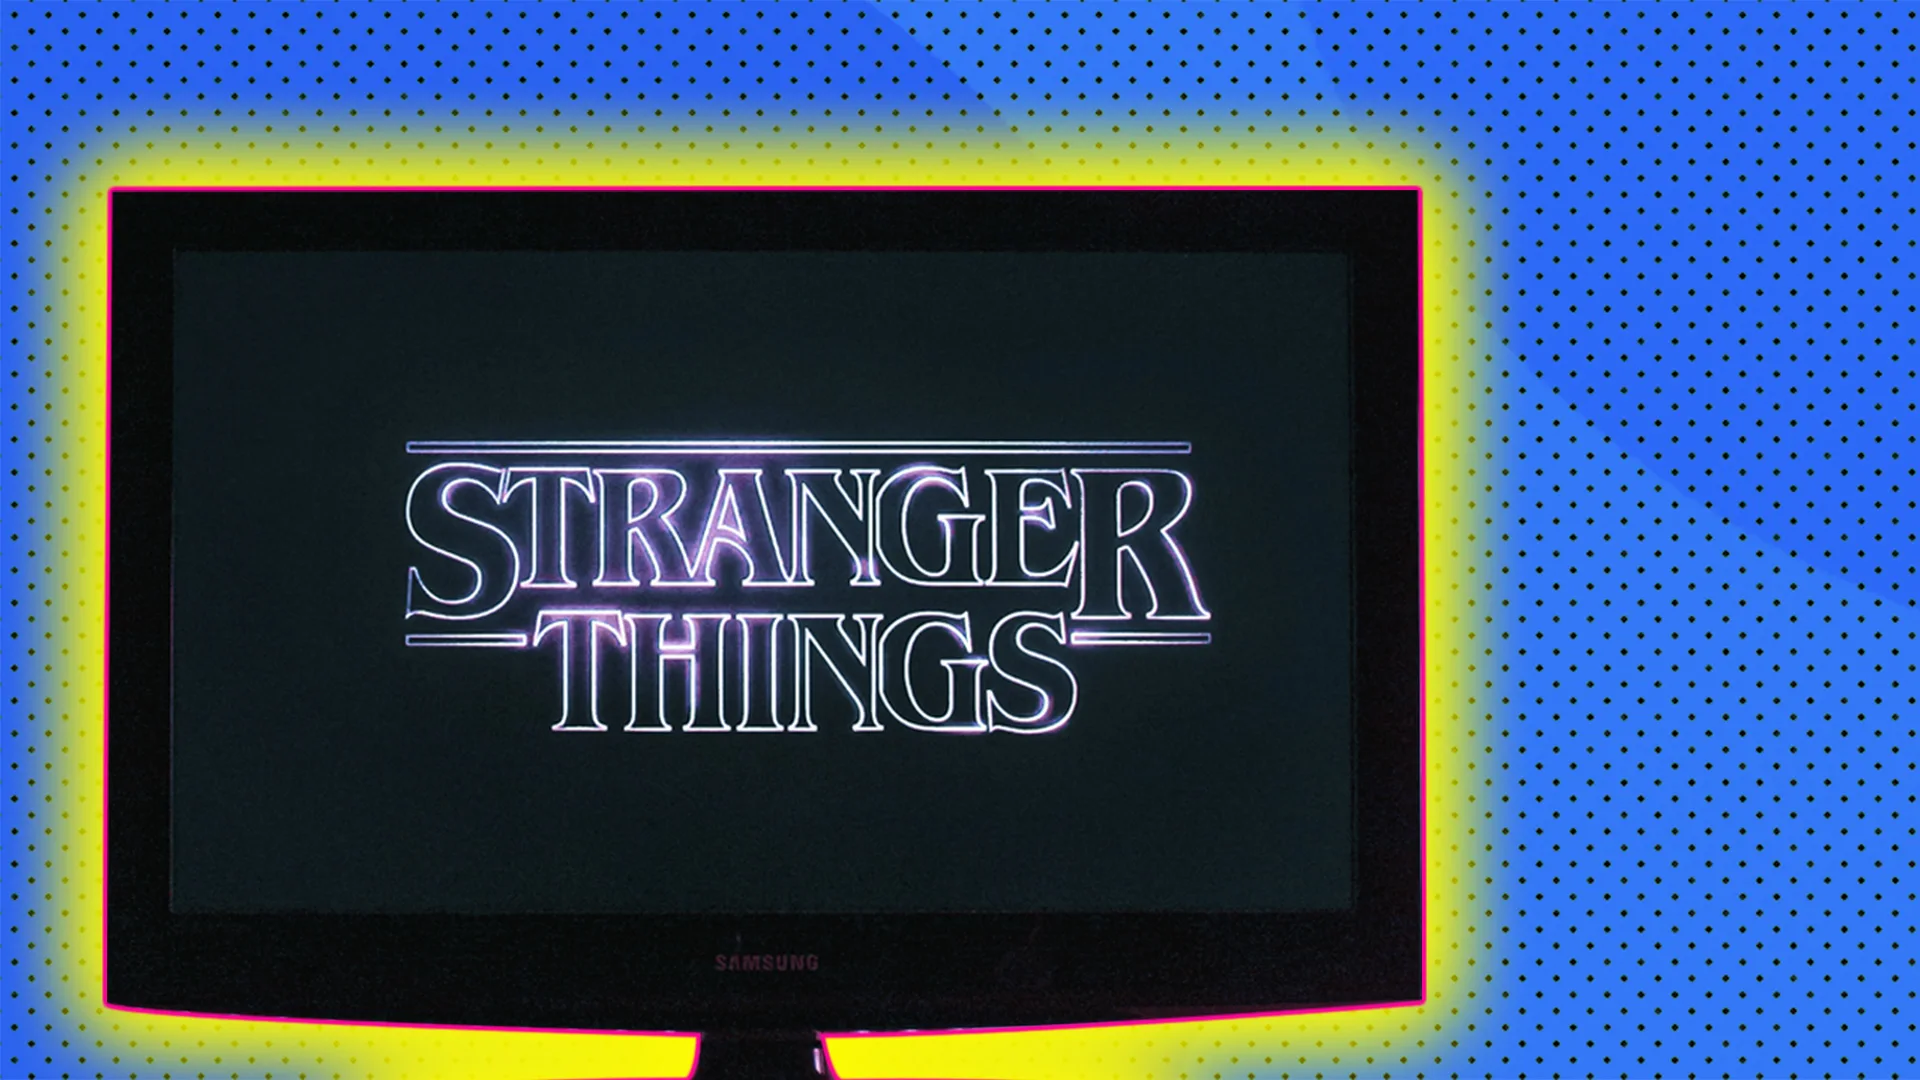 Stranger Things logo on a TV - in graphic house style